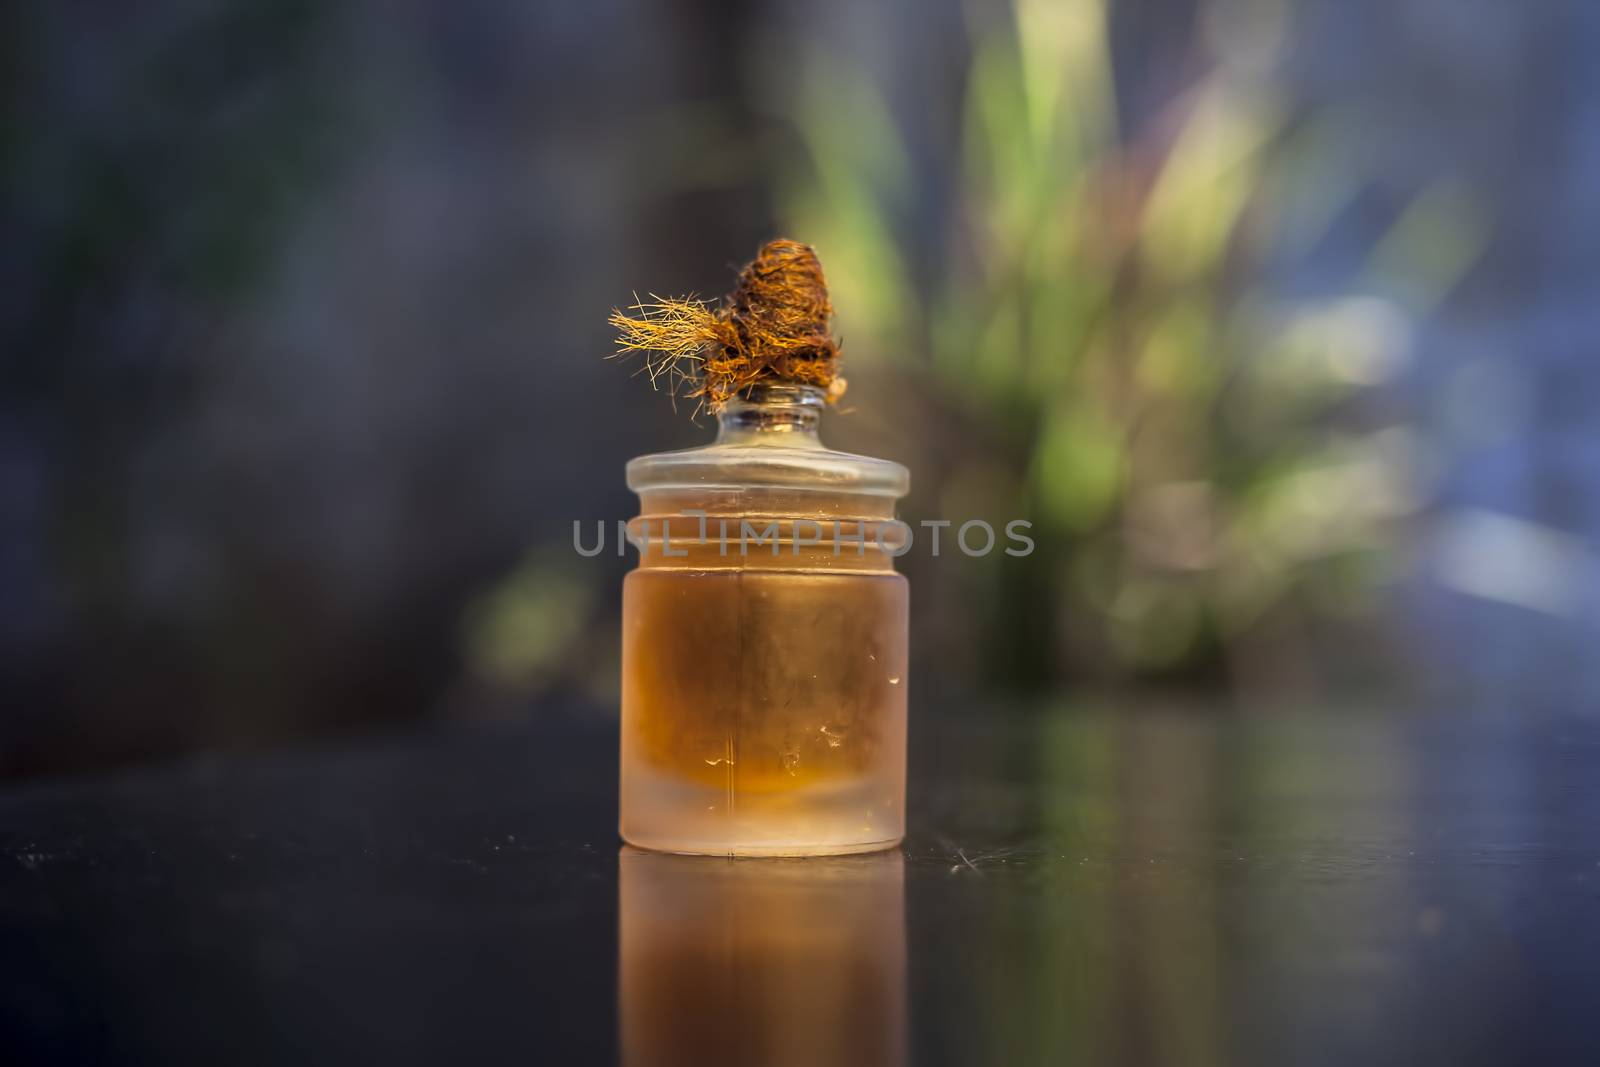 Brown colored essential oil-filled glass bottle on a wooden surface with creative lighting, selective focus and blurred background. by mirzamlk